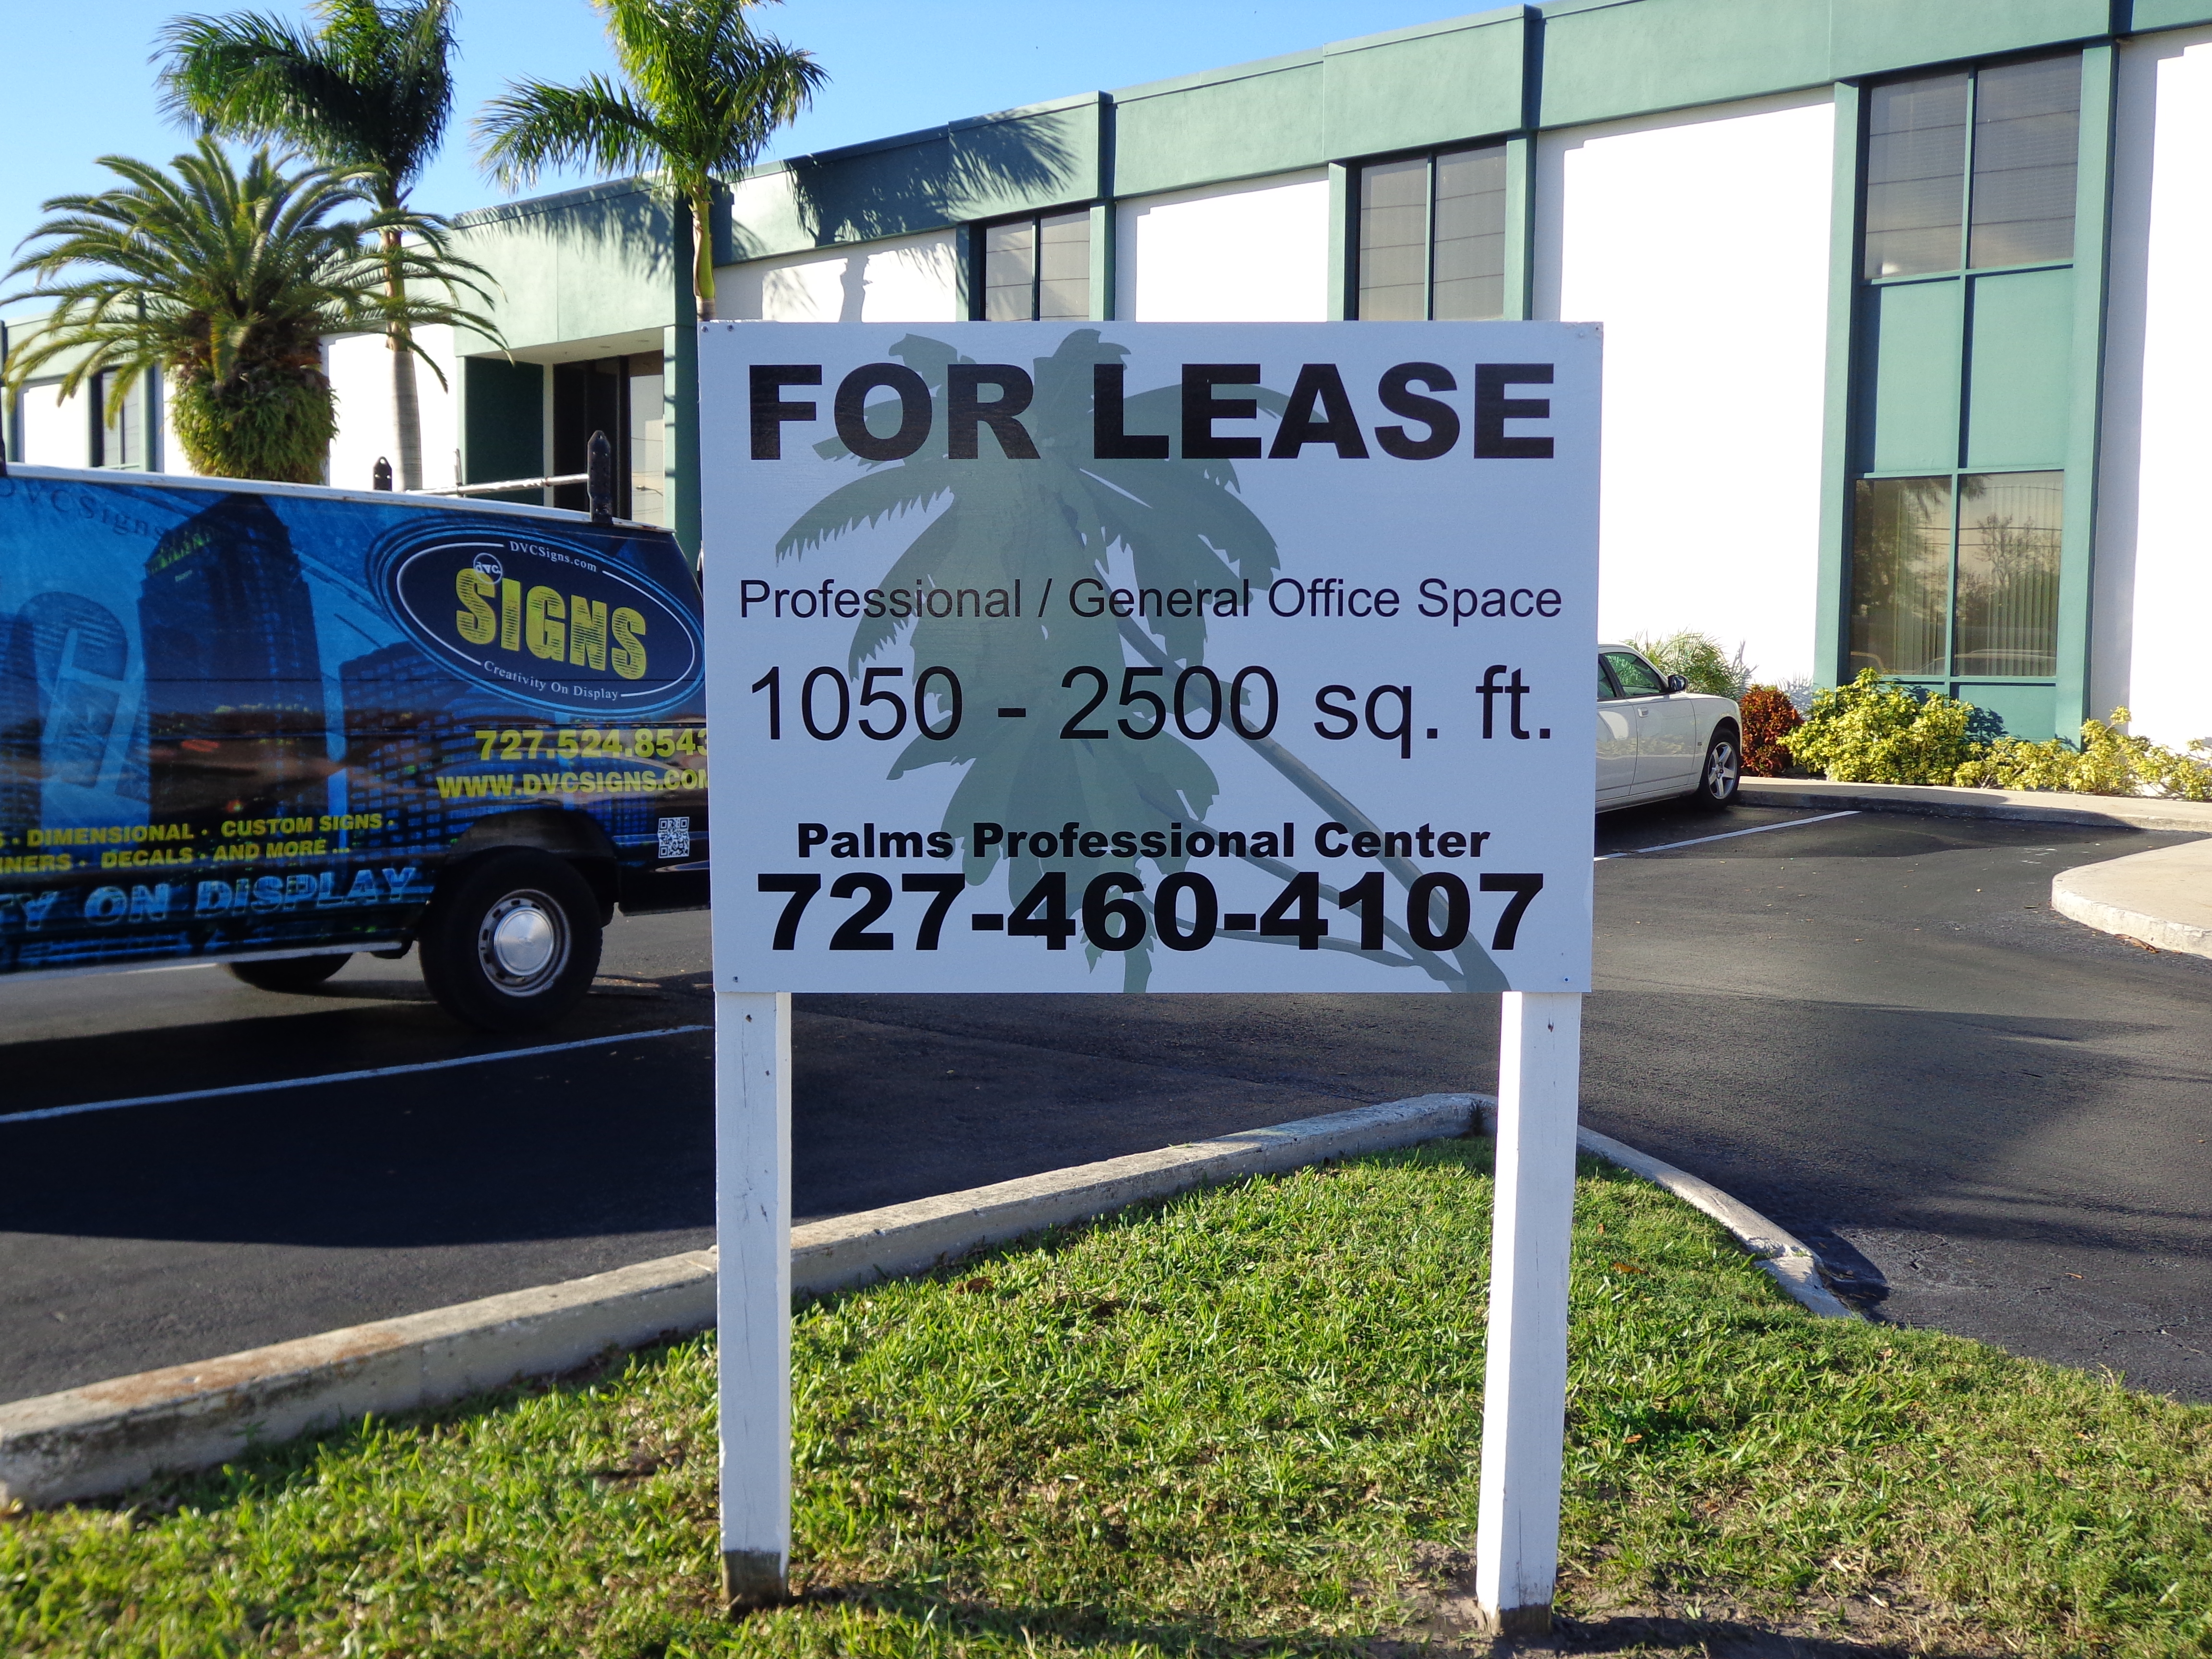 Real Estate Signage - (For sale, For lease).